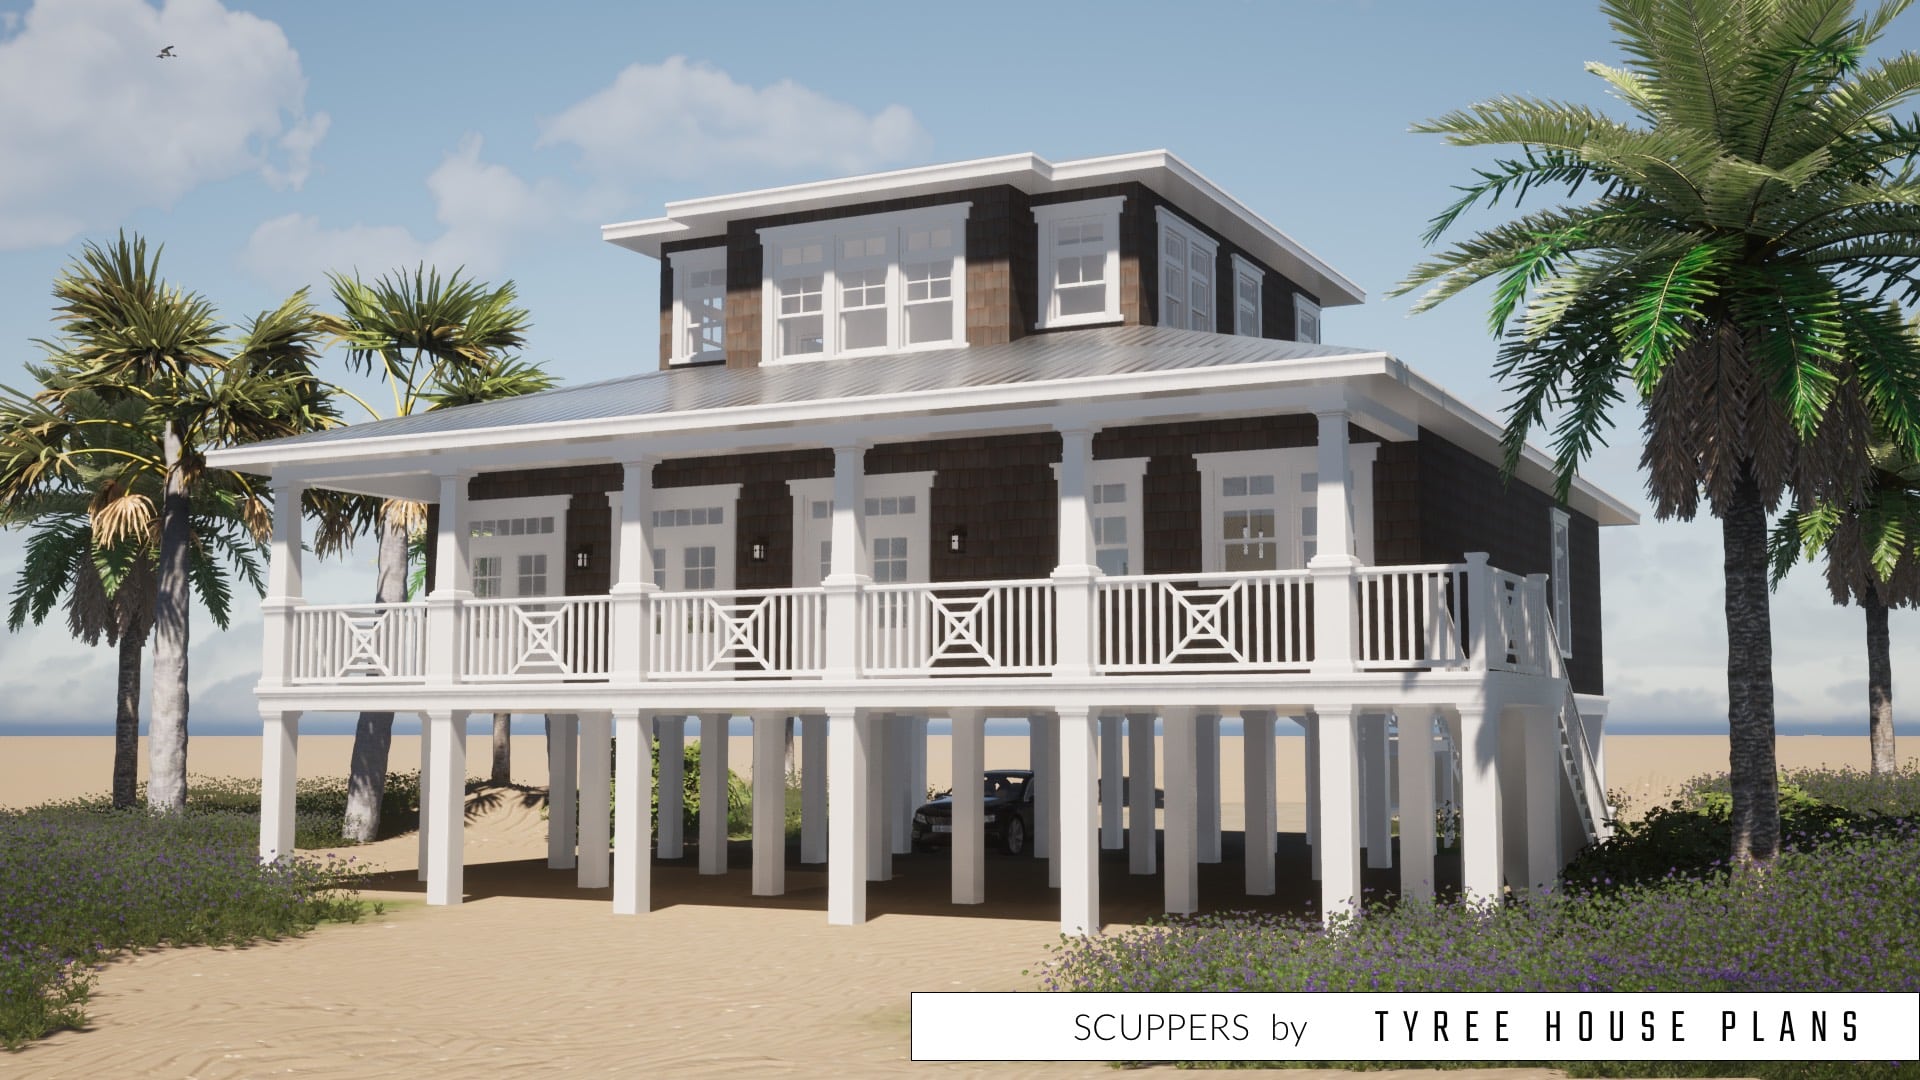 Scuppers House Plan by Tyree House Plans